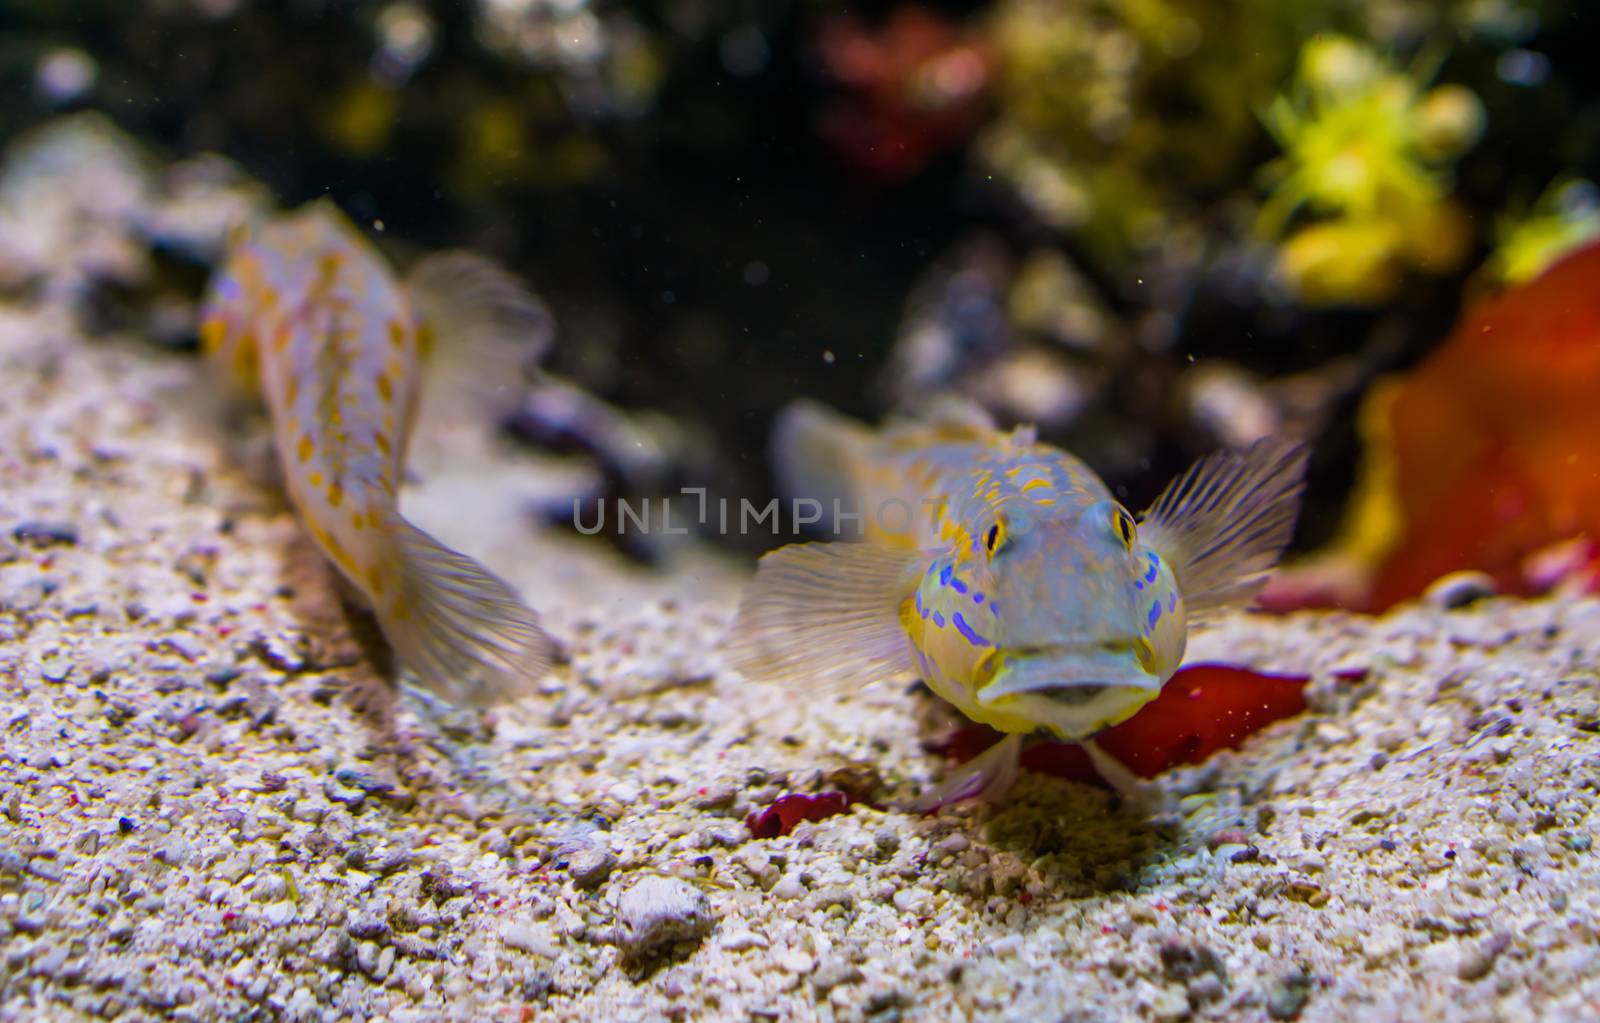 orange spotted sleeper goby in closeup, sand sifting fish, tropical aquarium pet from the indian ocean